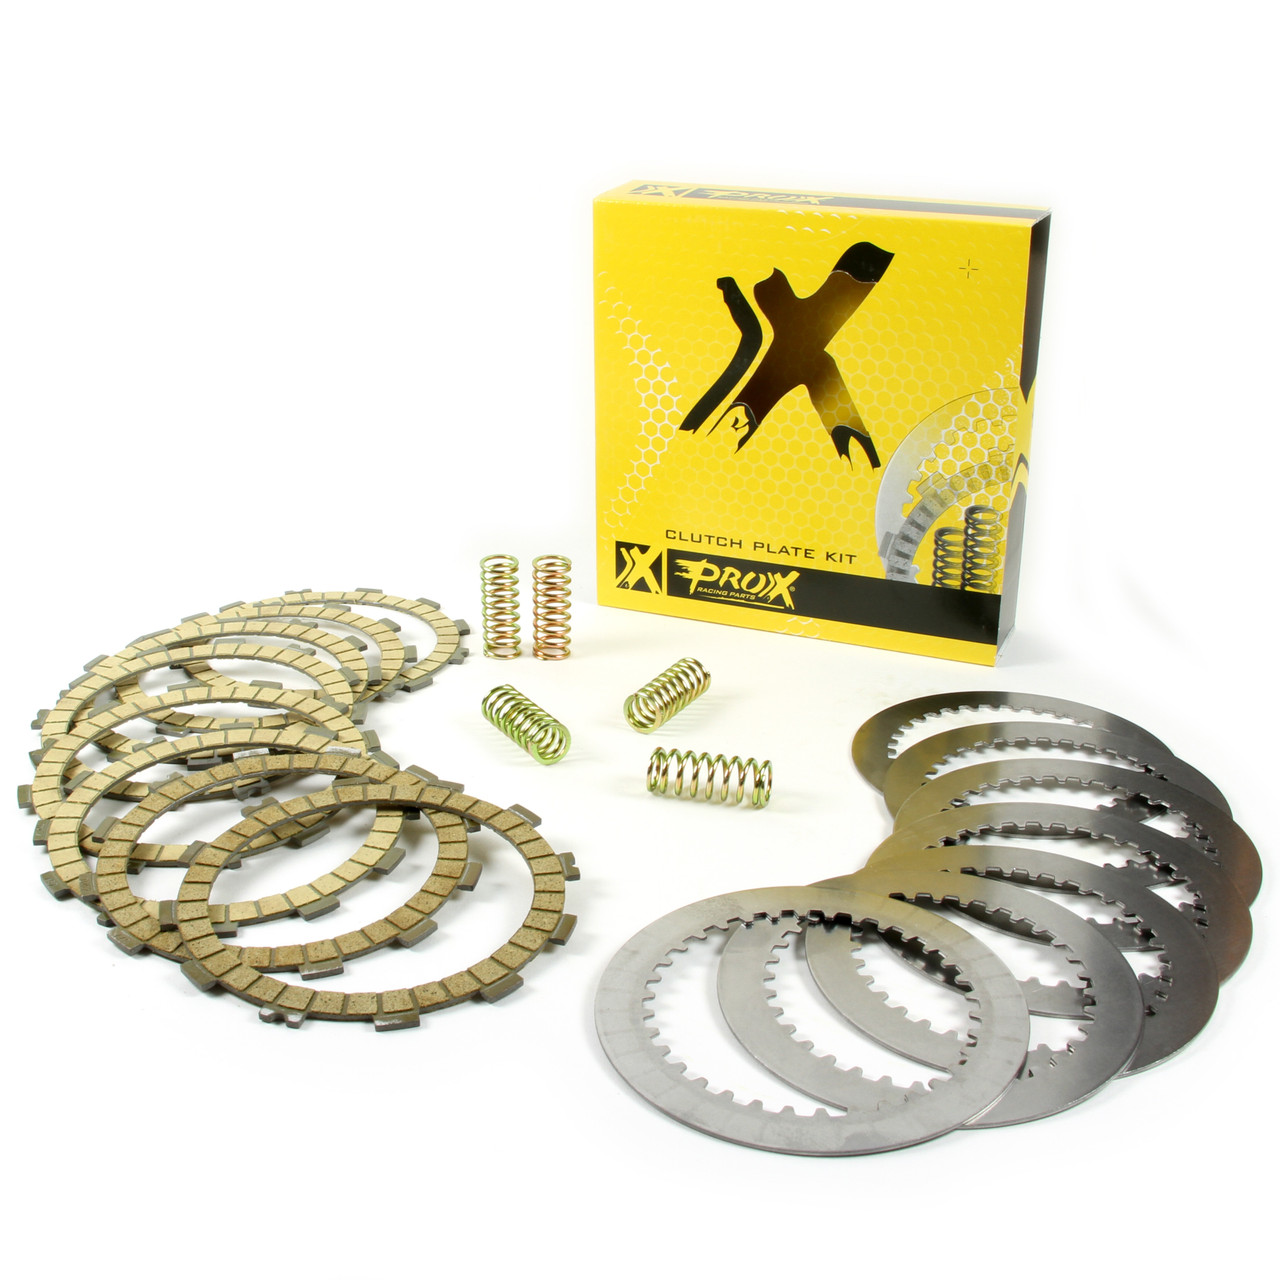 Prox New Complete Clutch Plate Set w/Springs, 19-43005CK